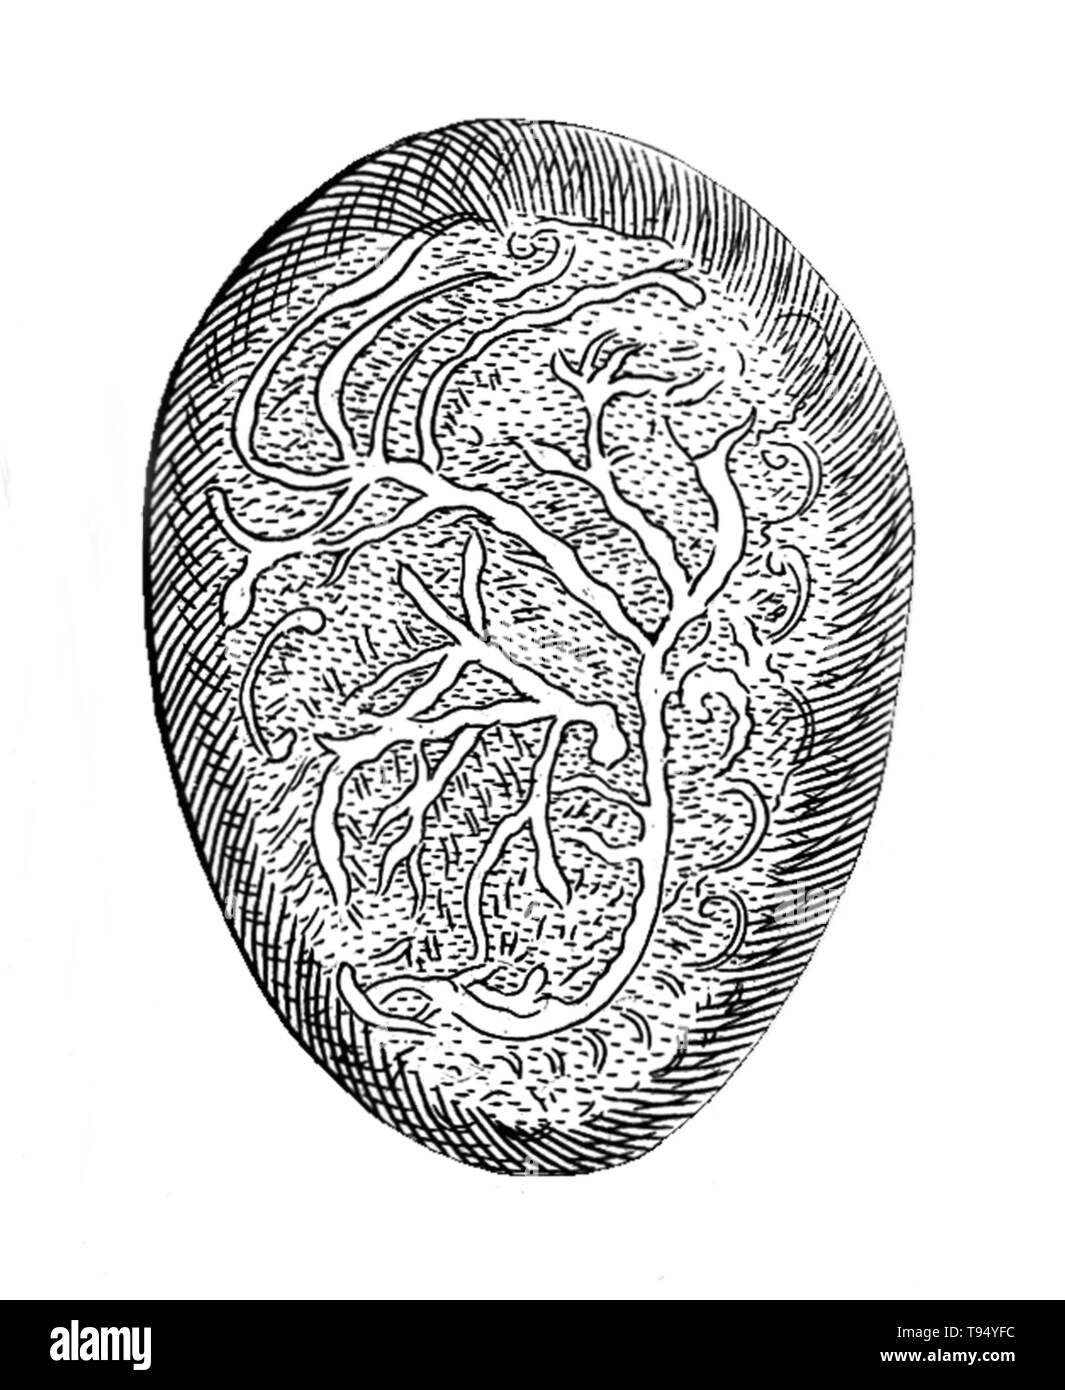 Engraving of an embryo. 'The nerves derived from the back and dispersed through the whole'. From 'Speculum matricis hybernicum, or, The Irish midwives handmaid catechistically composed' by James Wolveridge, M.D. Published: 1671. Stock Photo